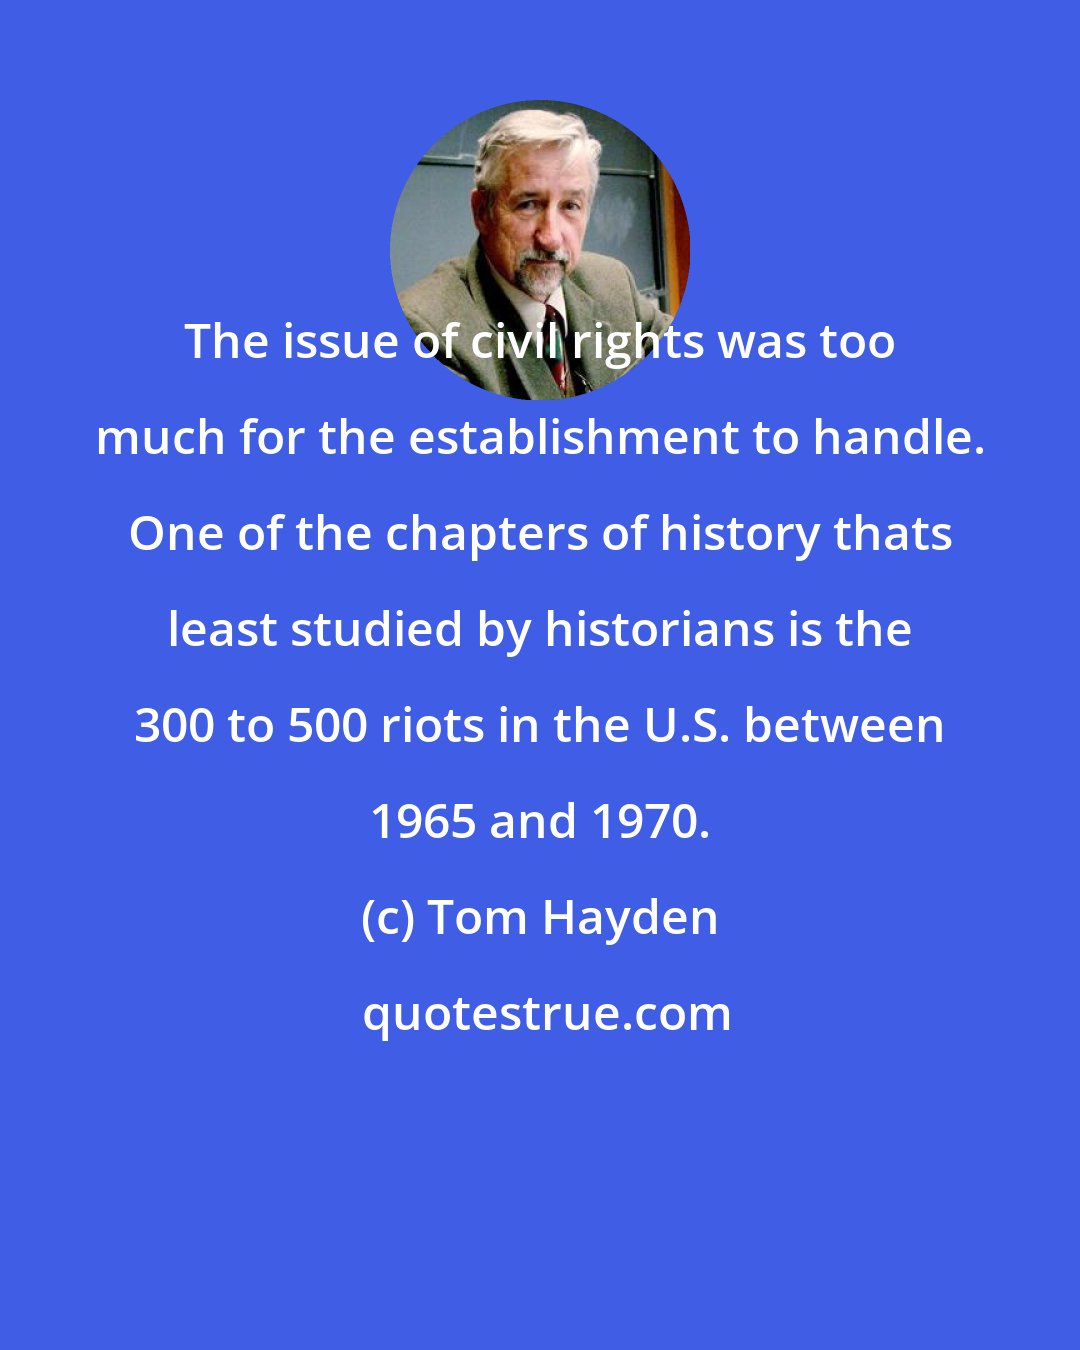 Tom Hayden: The issue of civil rights was too much for the establishment to handle. One of the chapters of history thats least studied by historians is the 300 to 500 riots in the U.S. between 1965 and 1970.